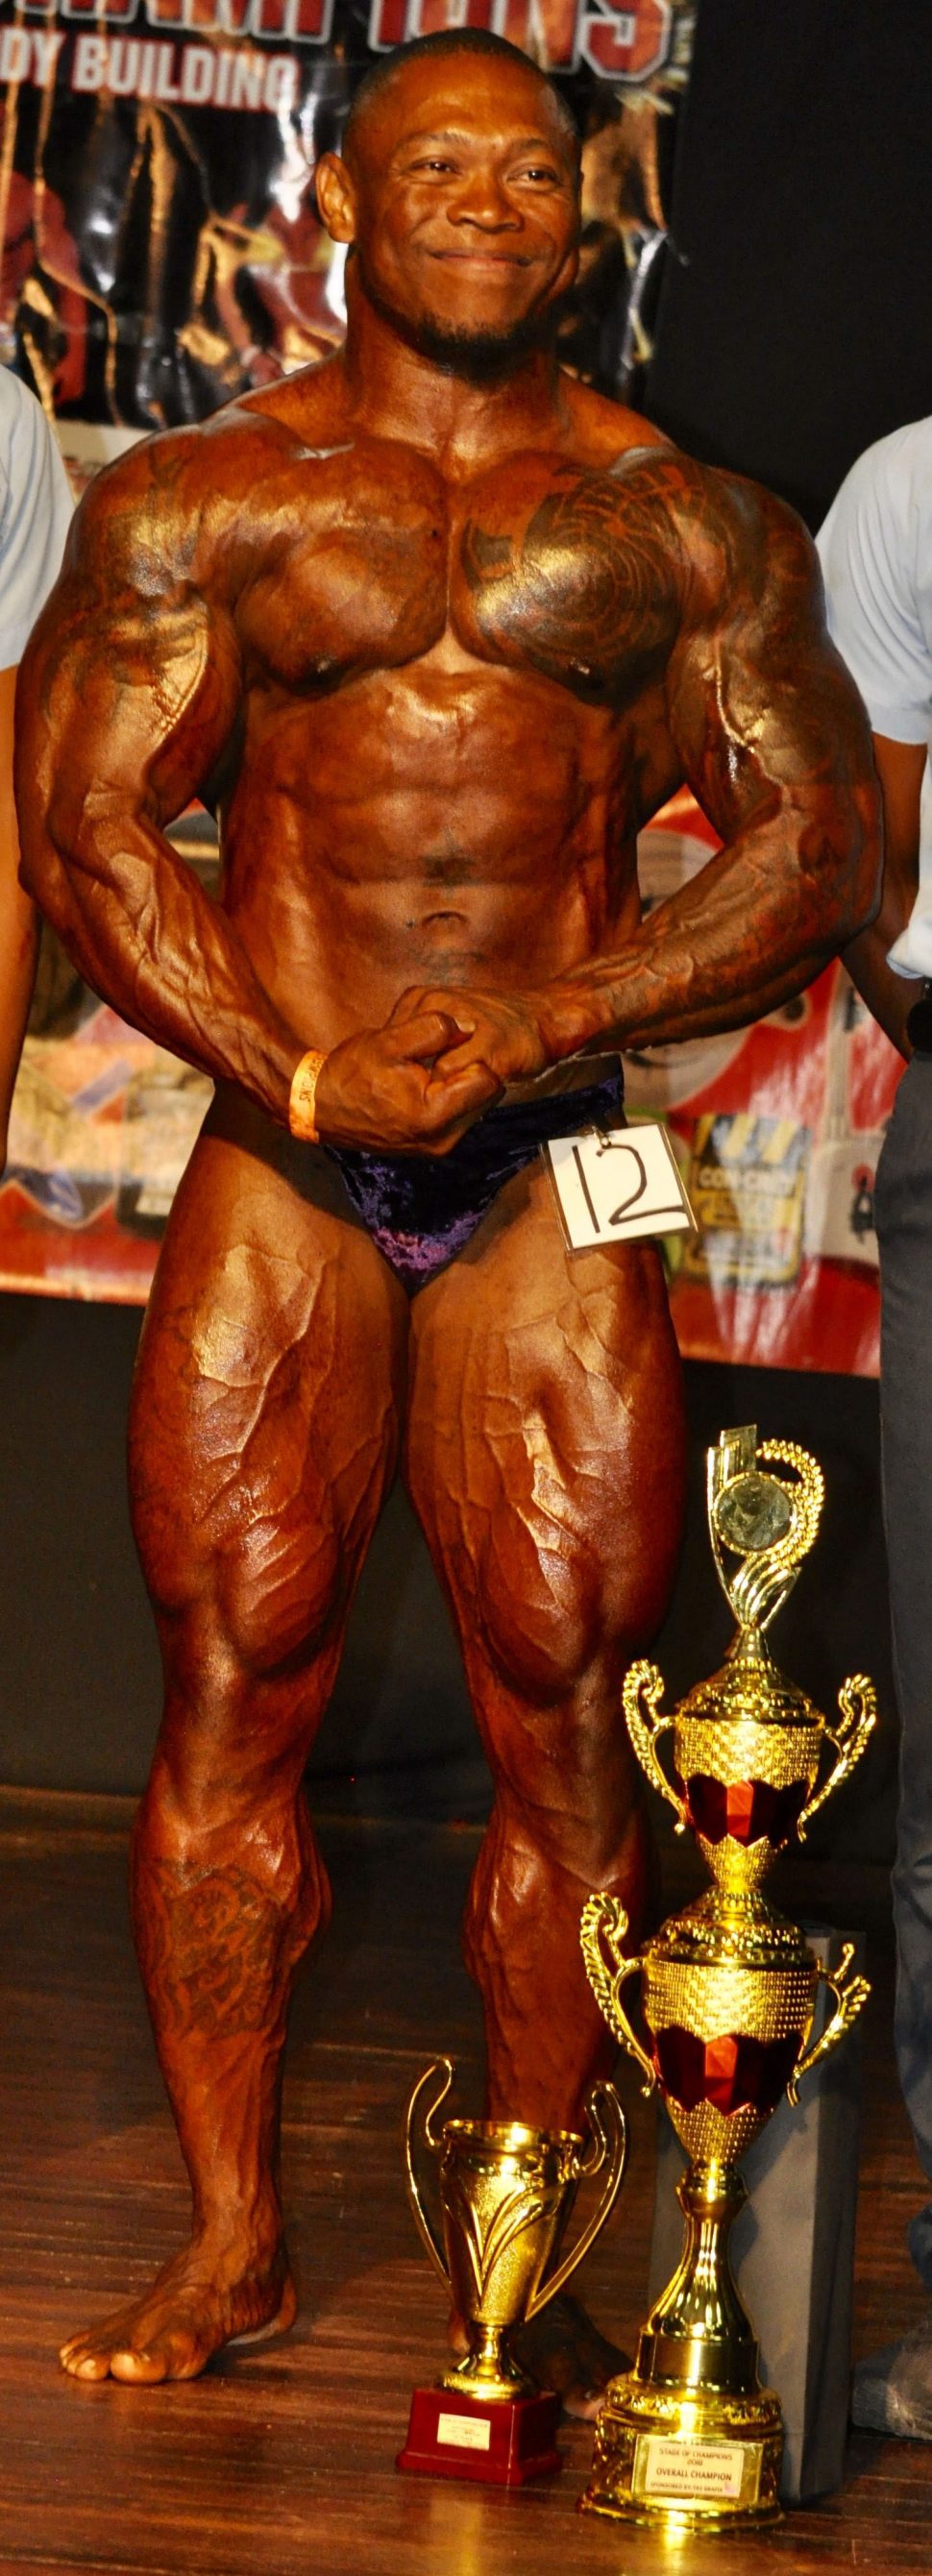 Wendel Setropawiro, winner in the heavyweight class, stood head and shoulders above the competition and flexed and posed his way to the Mr. ‘Stage of Champions’ overall title.
